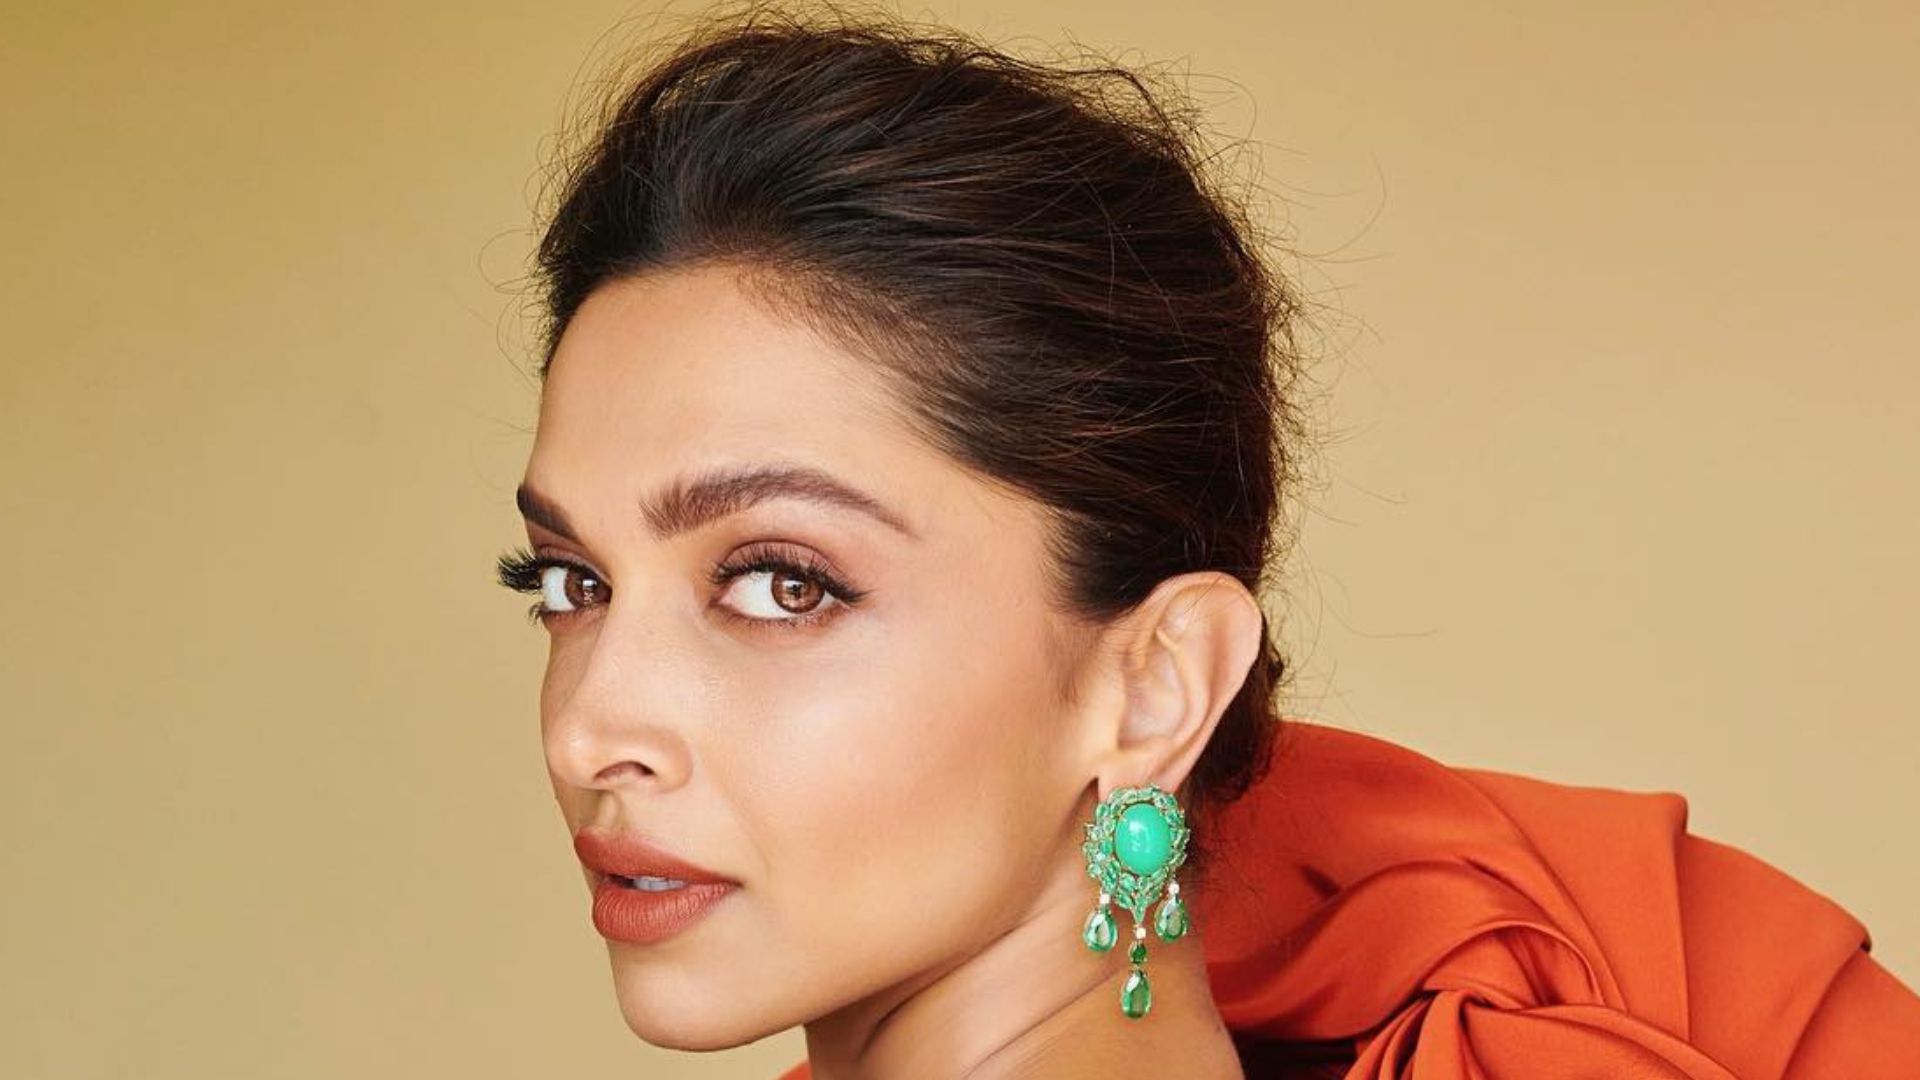 Reddit says Deepika Padukone's first ever Cartier campaign is